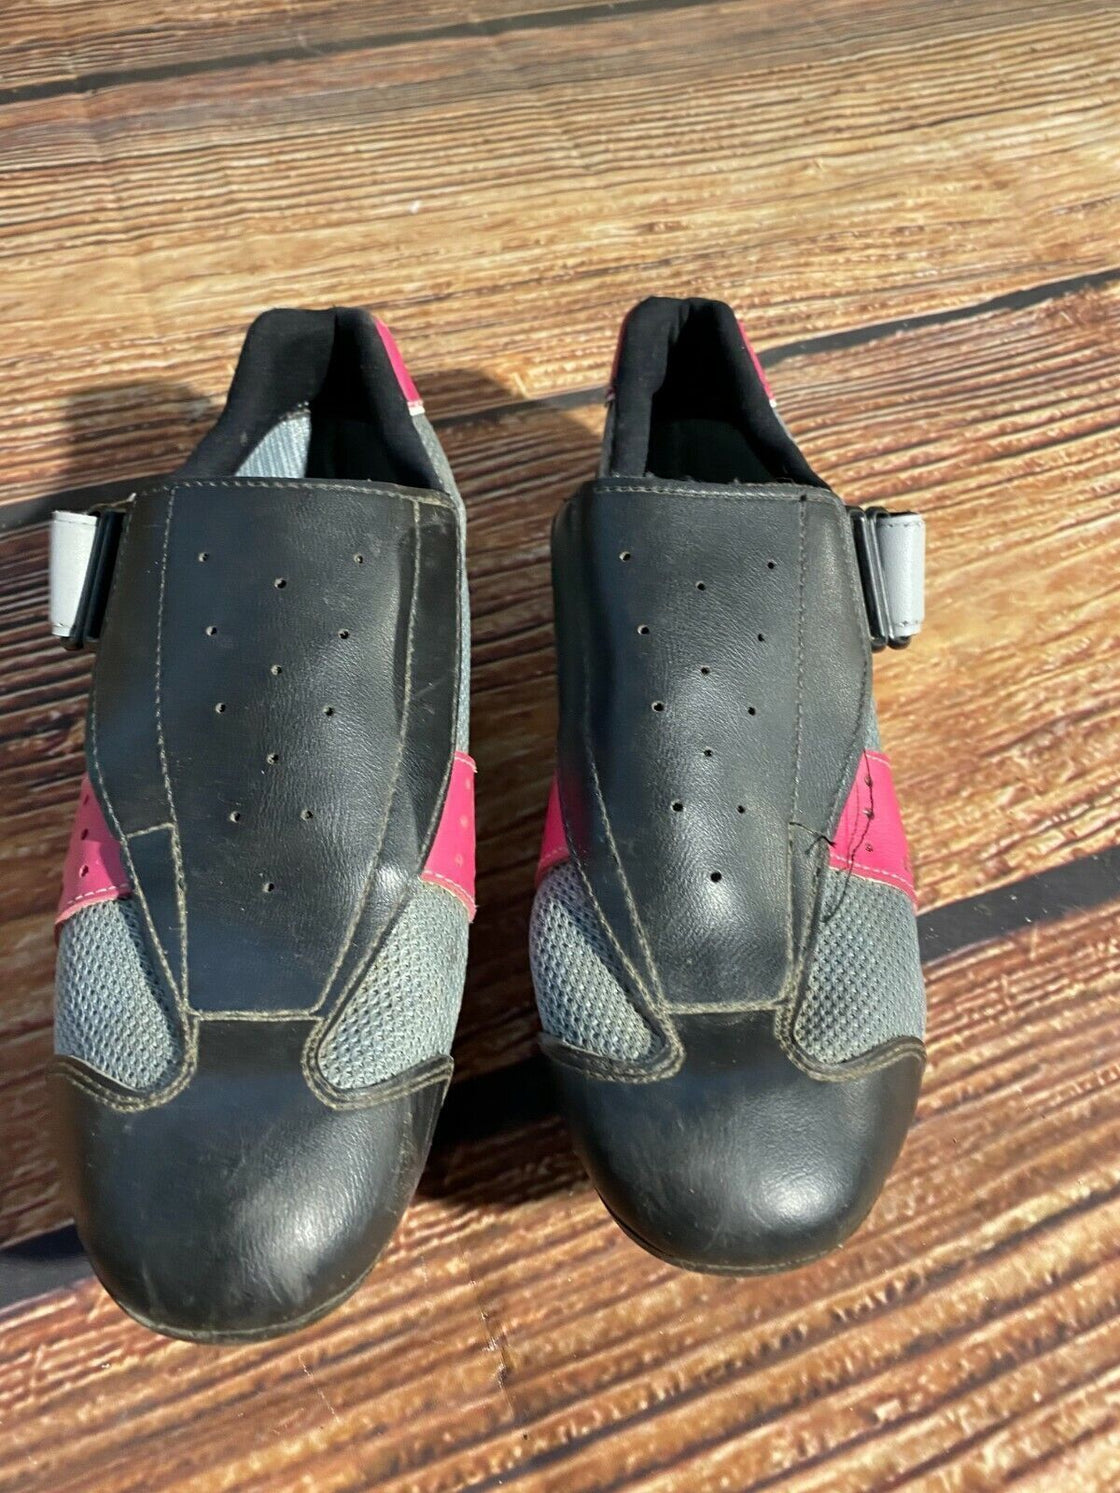 AGU Road Cycling Shoes Road Bike Boots 3 Bolts Size EU42 with Cleats